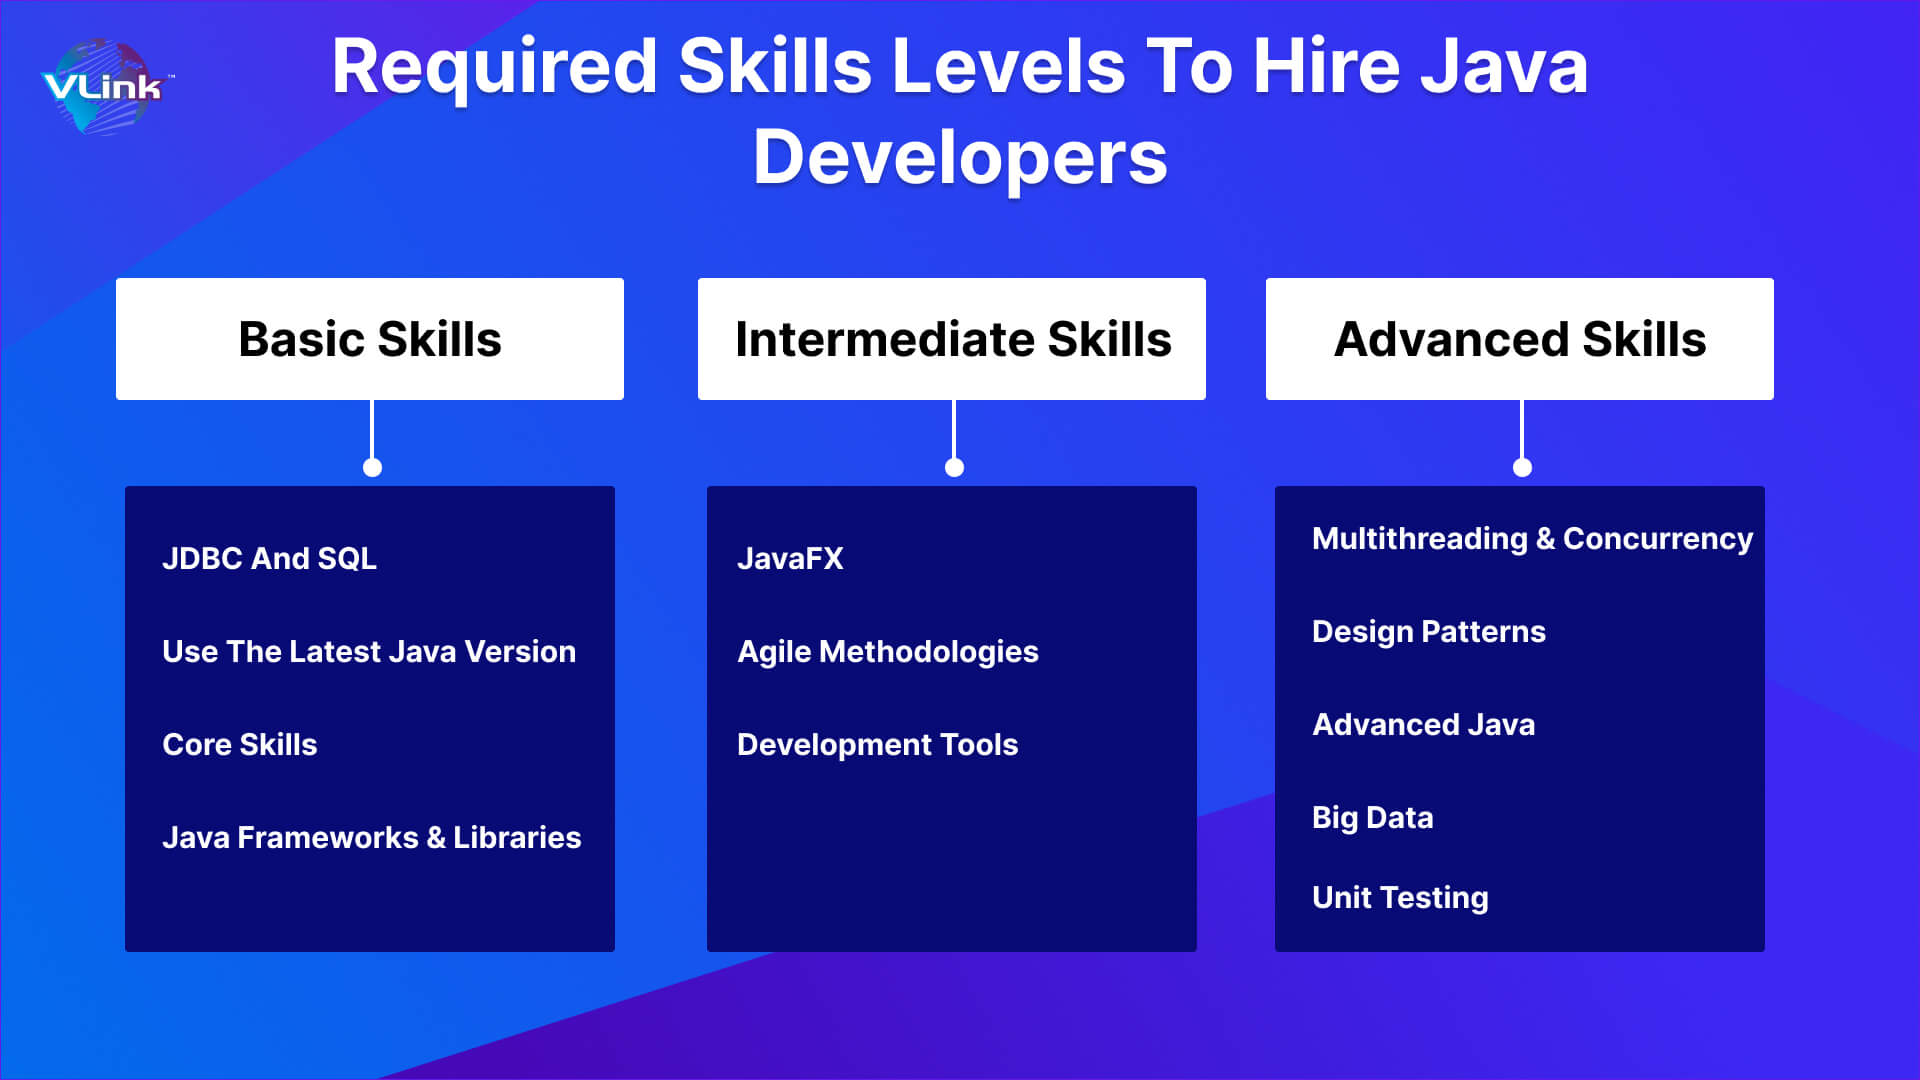 Required Skills Levels to Hire Java Developers